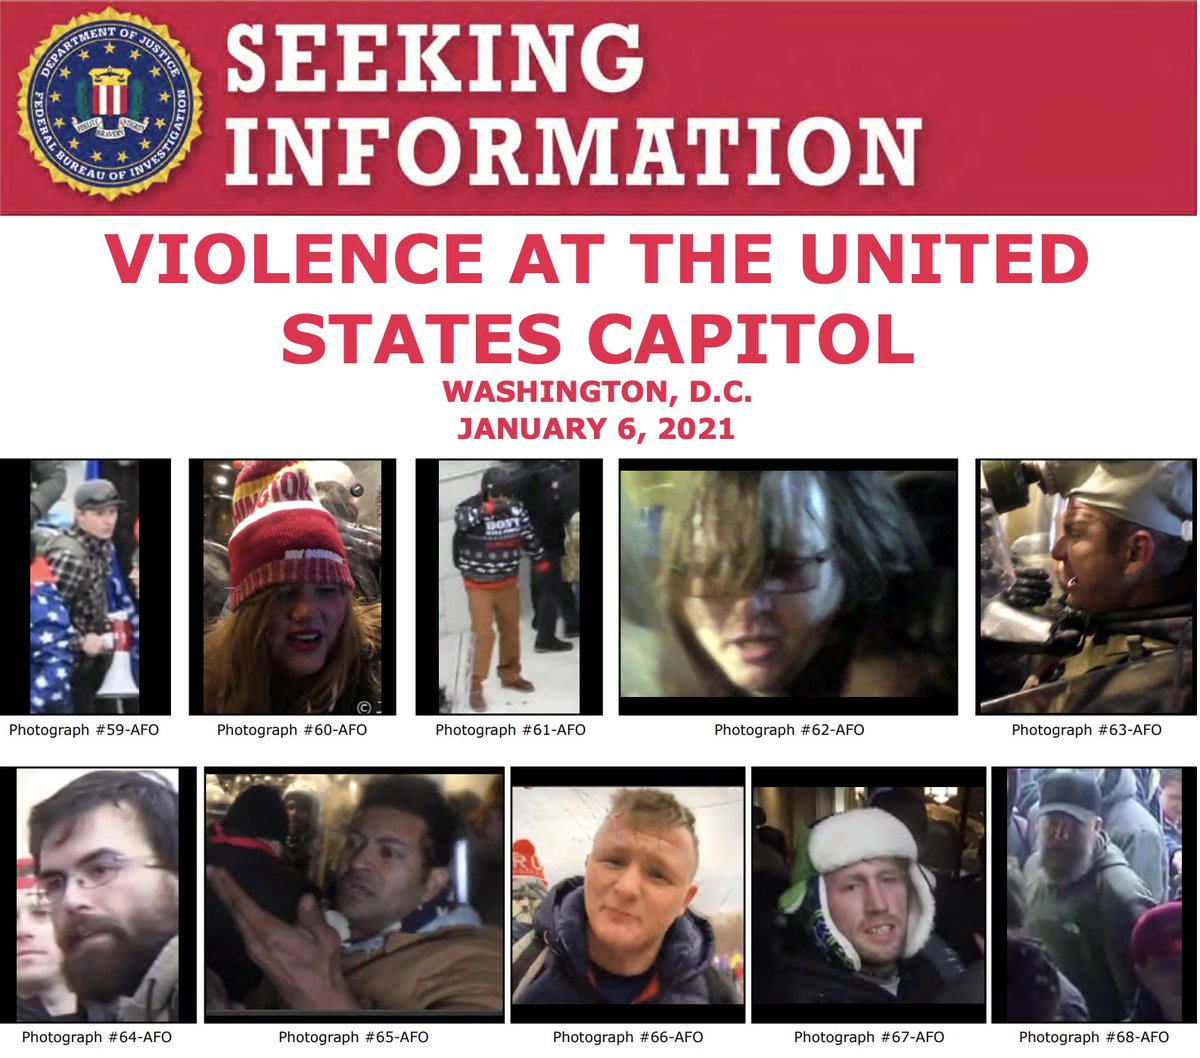 Help the #FBI identify individuals who unlawfully entered the U.S. Capitol on January 6 and assaulted federal law enforcement personnel. We added a new poster with more photos. Do you see someone familiar? Submit a tip at fbi.gov/USCapitol. @FBIWFO ow.ly/I5SH50D5XWv